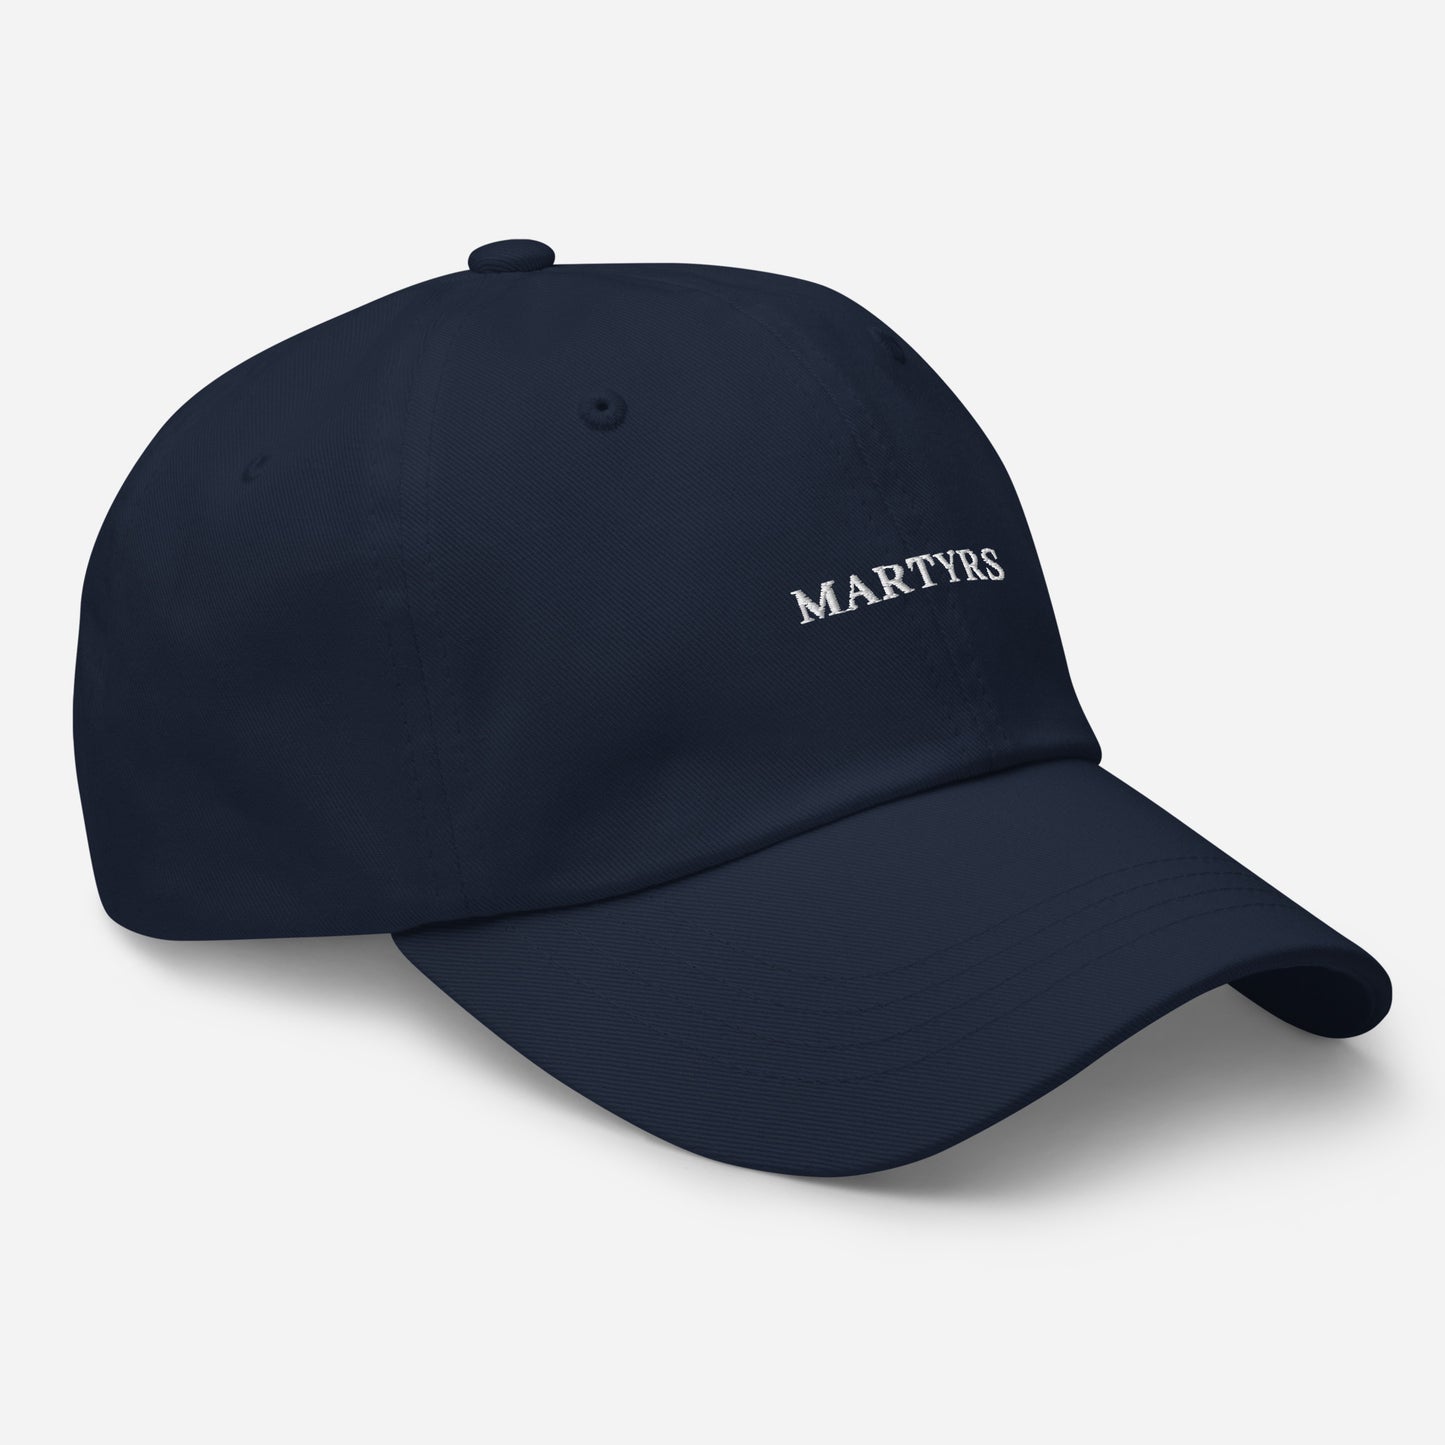 Martyrs - NAVY Classic Dad hat - WHITE FONT embroidery